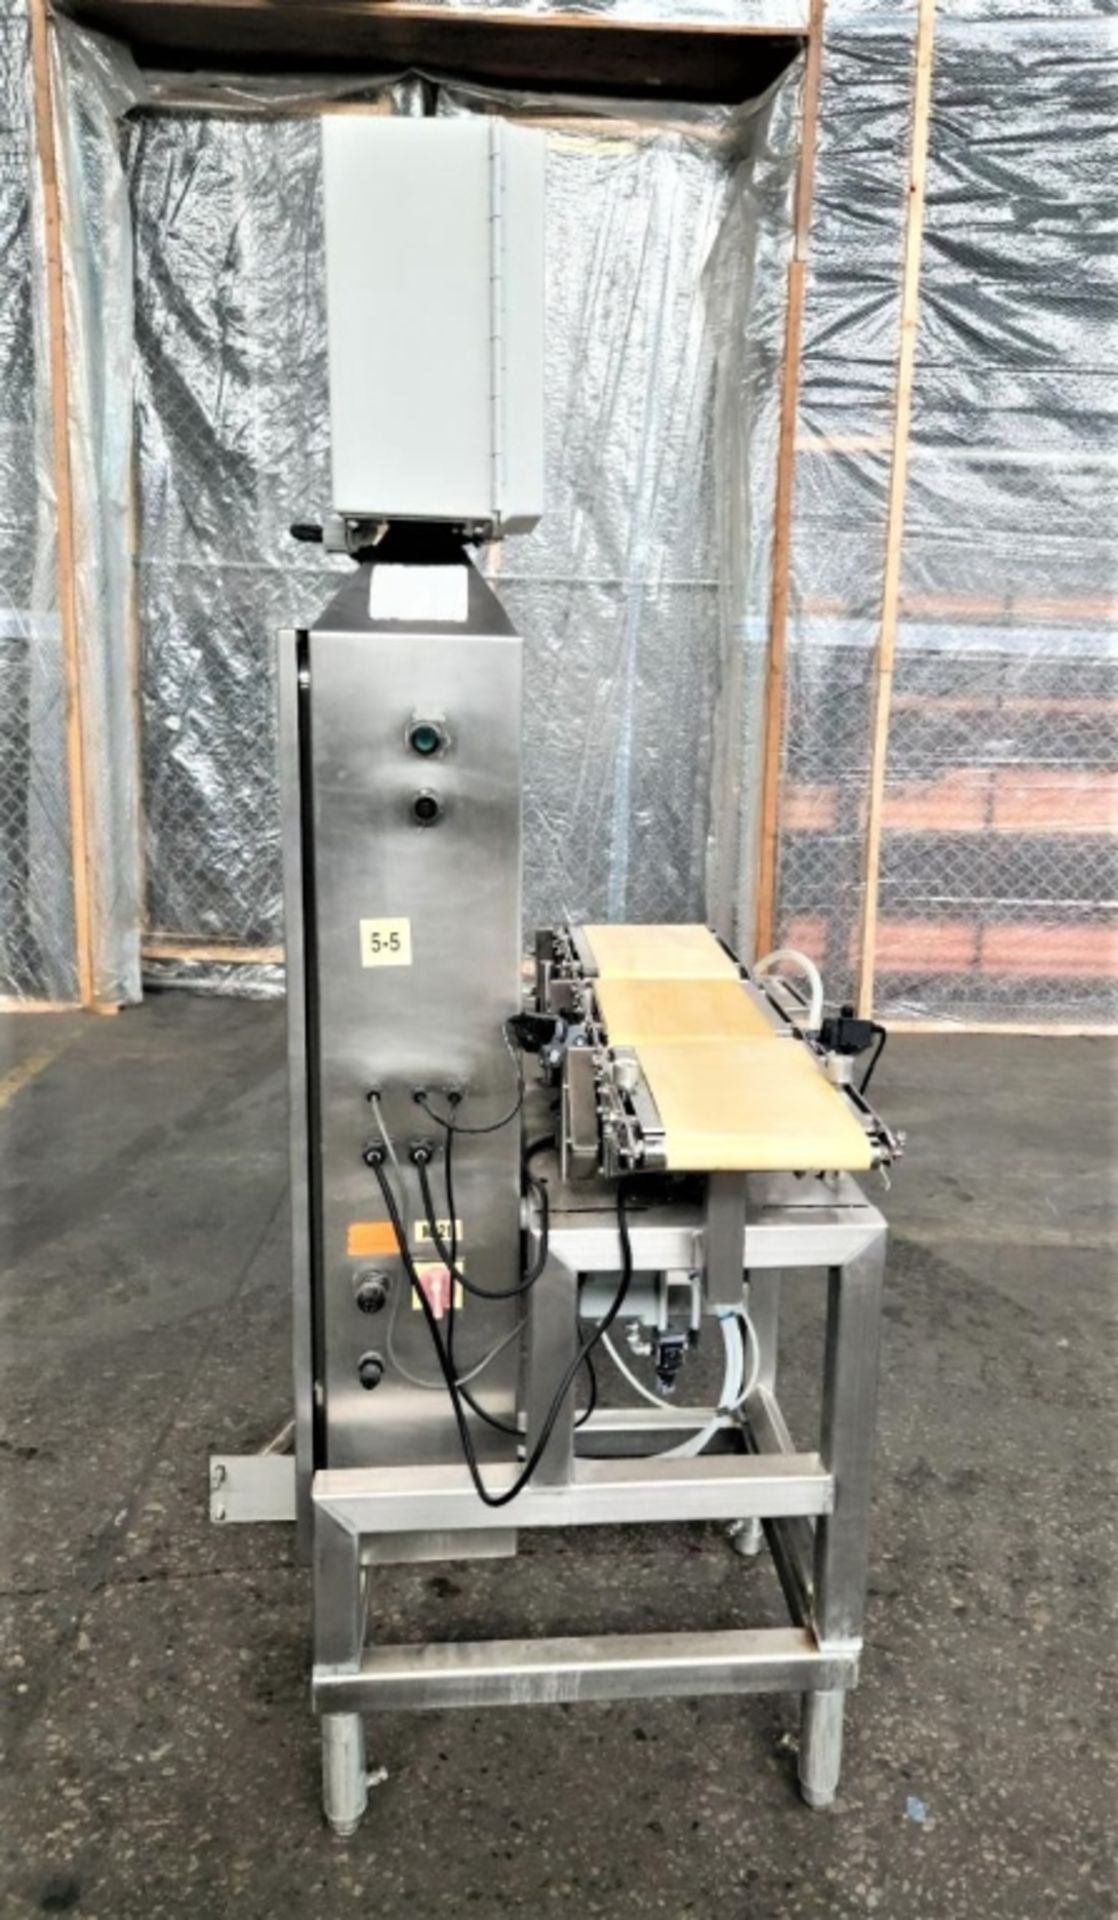 Lock WeighCheck S/S Checkweigher, Model WeighChek, Last Calibrated in 2021 with 12" Wide Belt, - Image 11 of 11